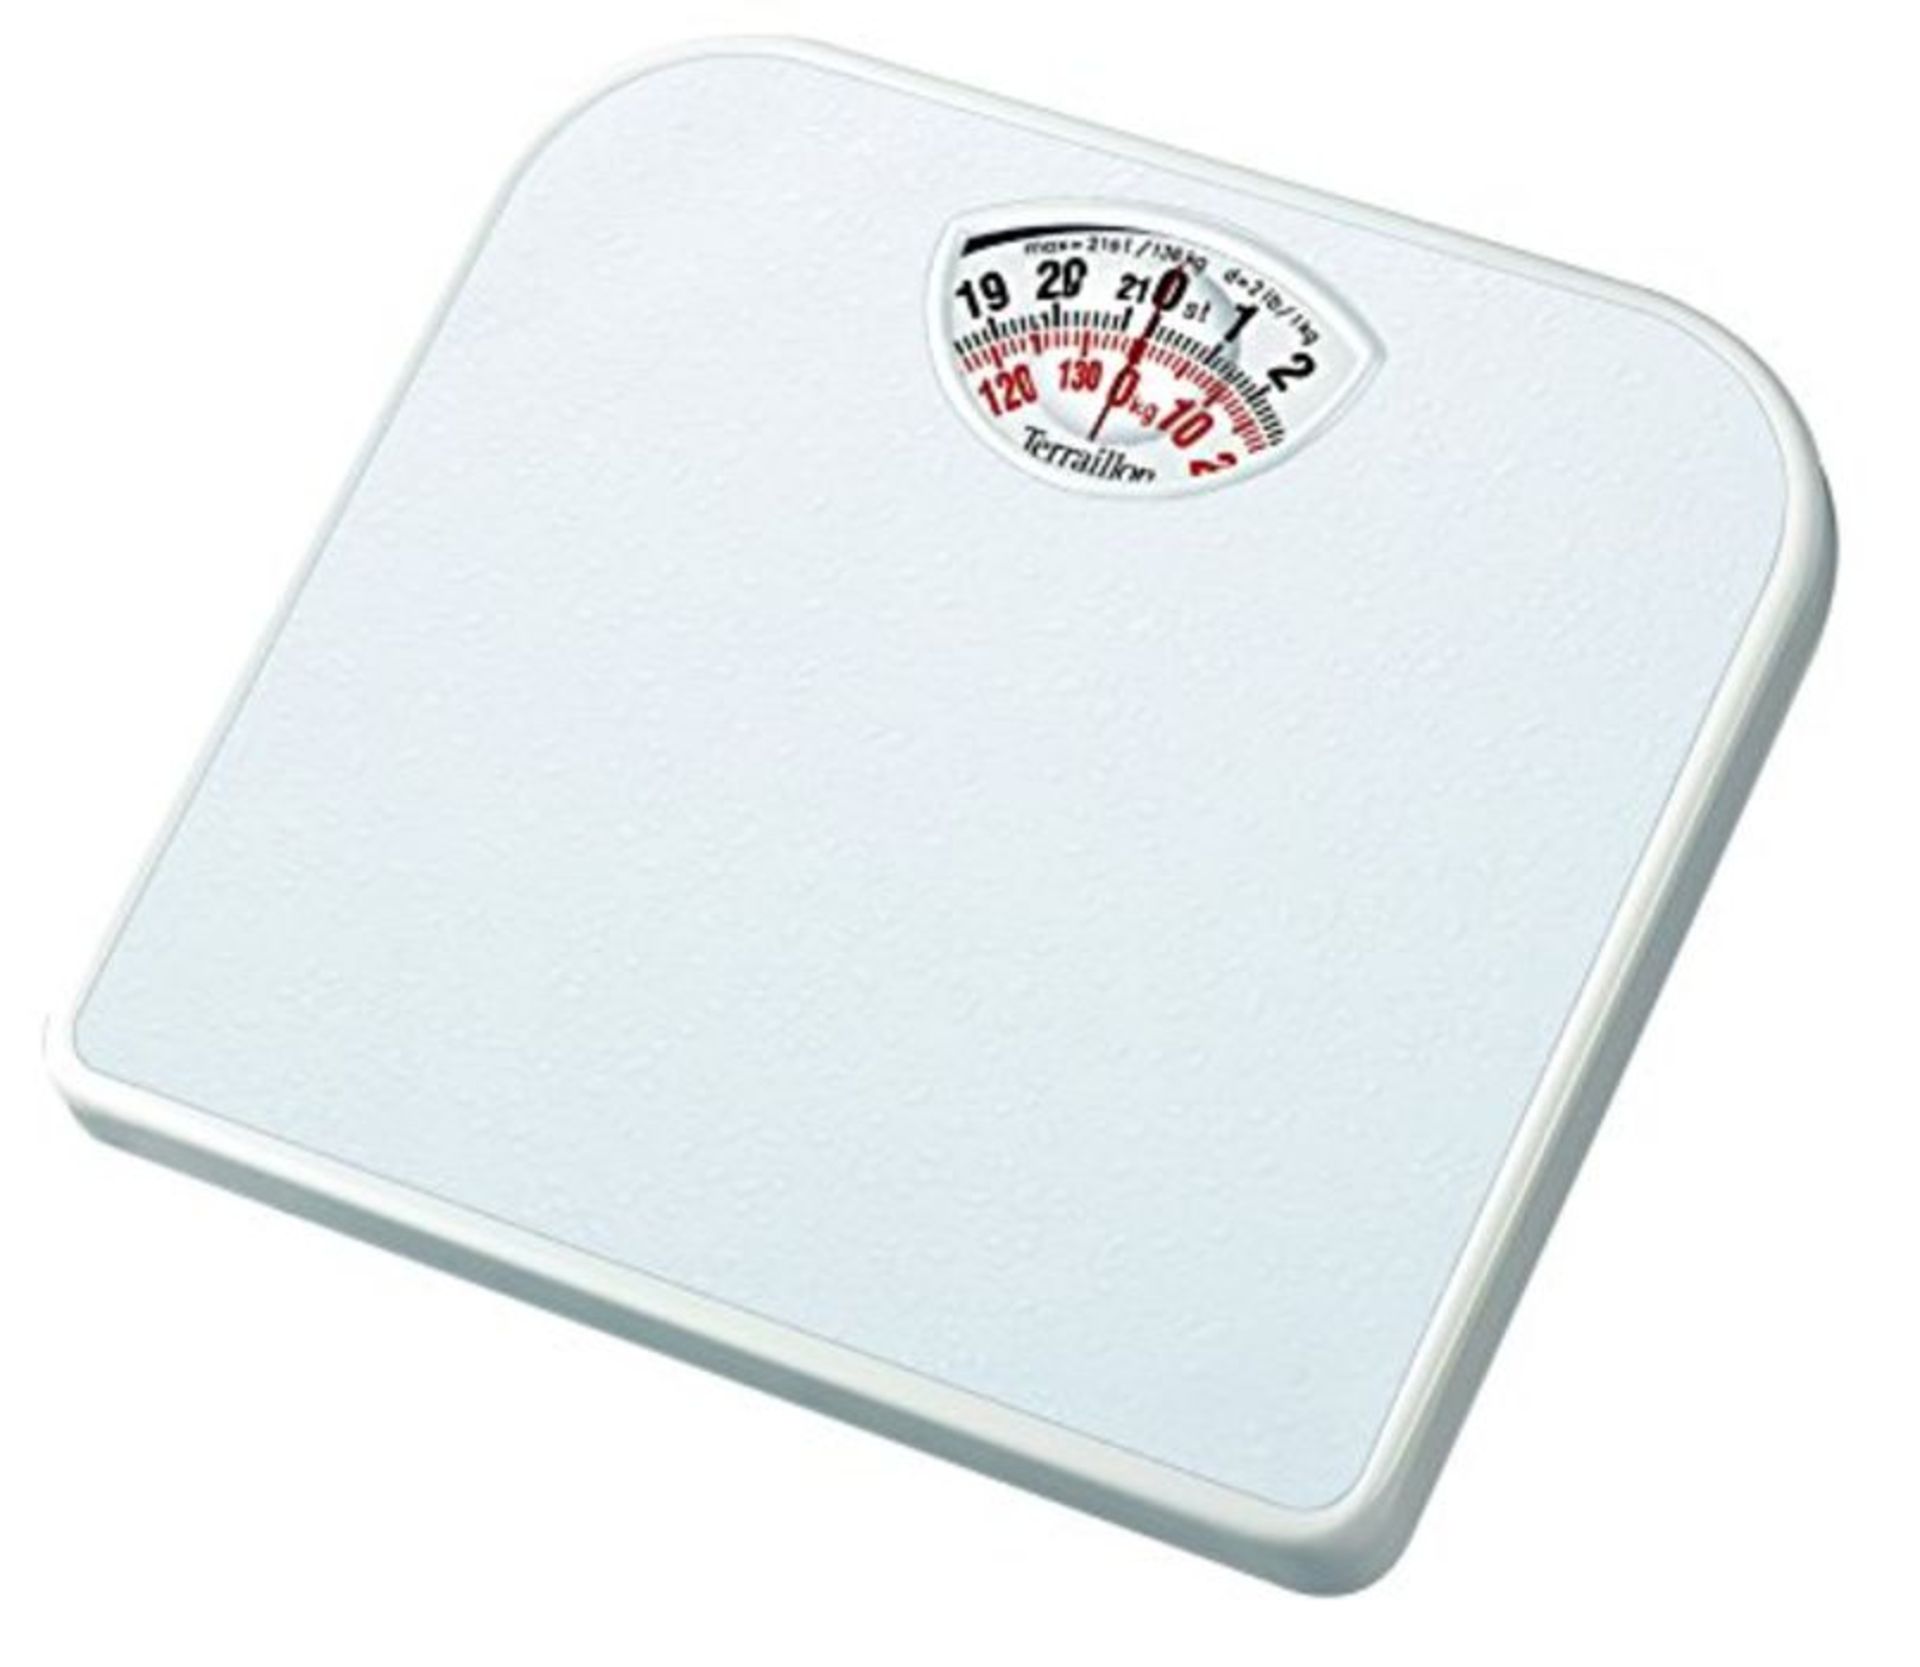 Terraillon Mechanical Bathroom Scale, Large Rotating dial, Compact, 120 kg/19 st, T101